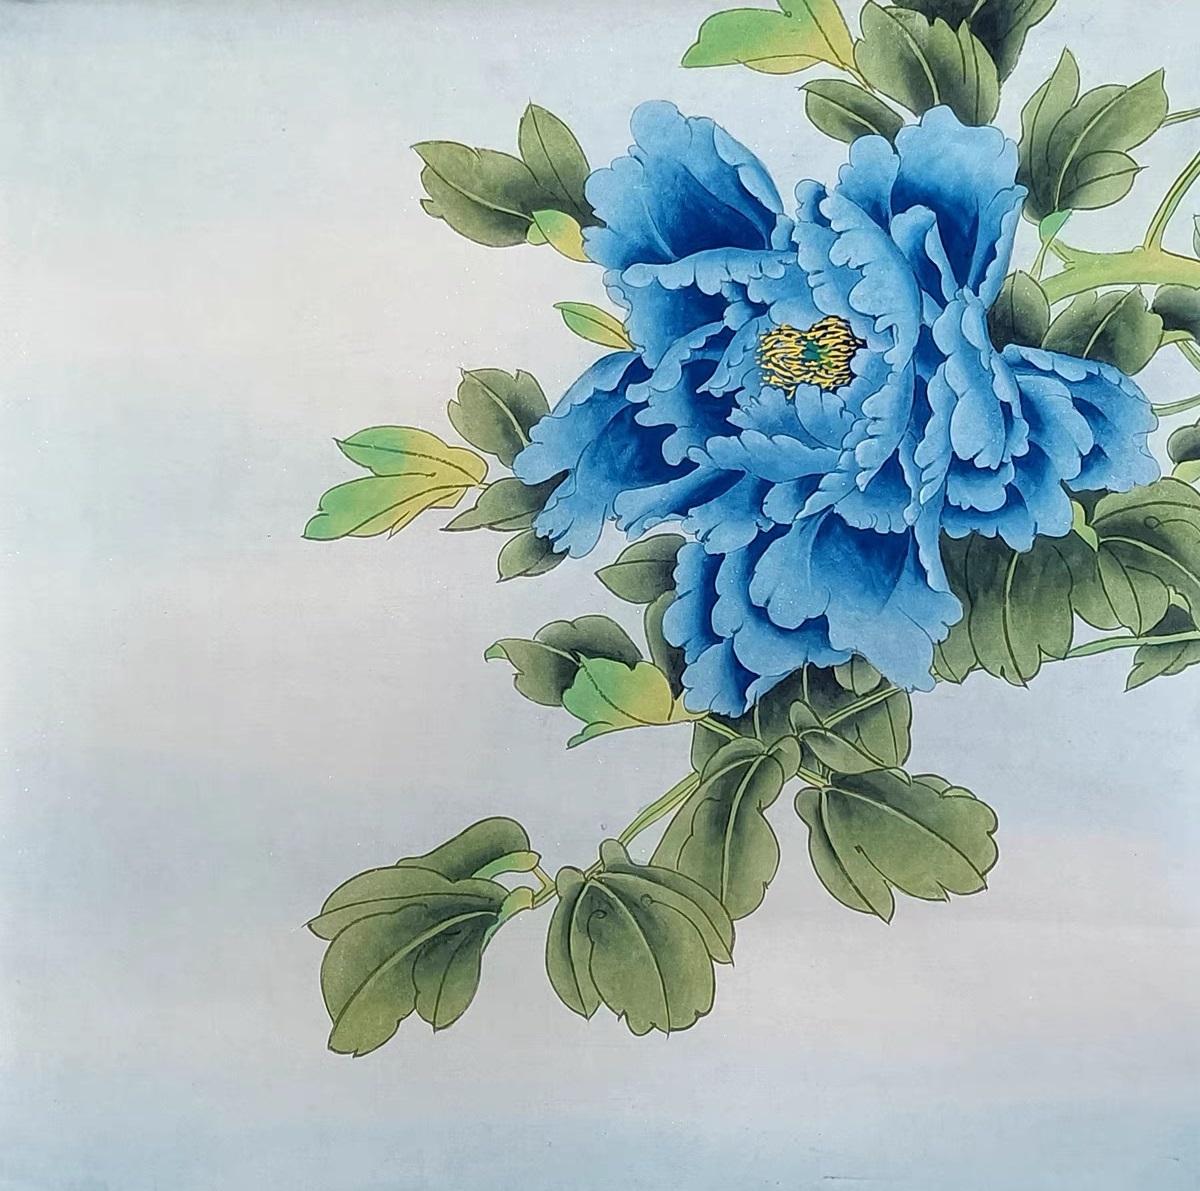 This Traditional Chinese Classic Flowers Ink Hand Painting is a nice art for decoration or gift to others.
The pony flower is Chinese country flower representing wealth and harmony.
This ink painting is hand painted by our skillful master.

If you